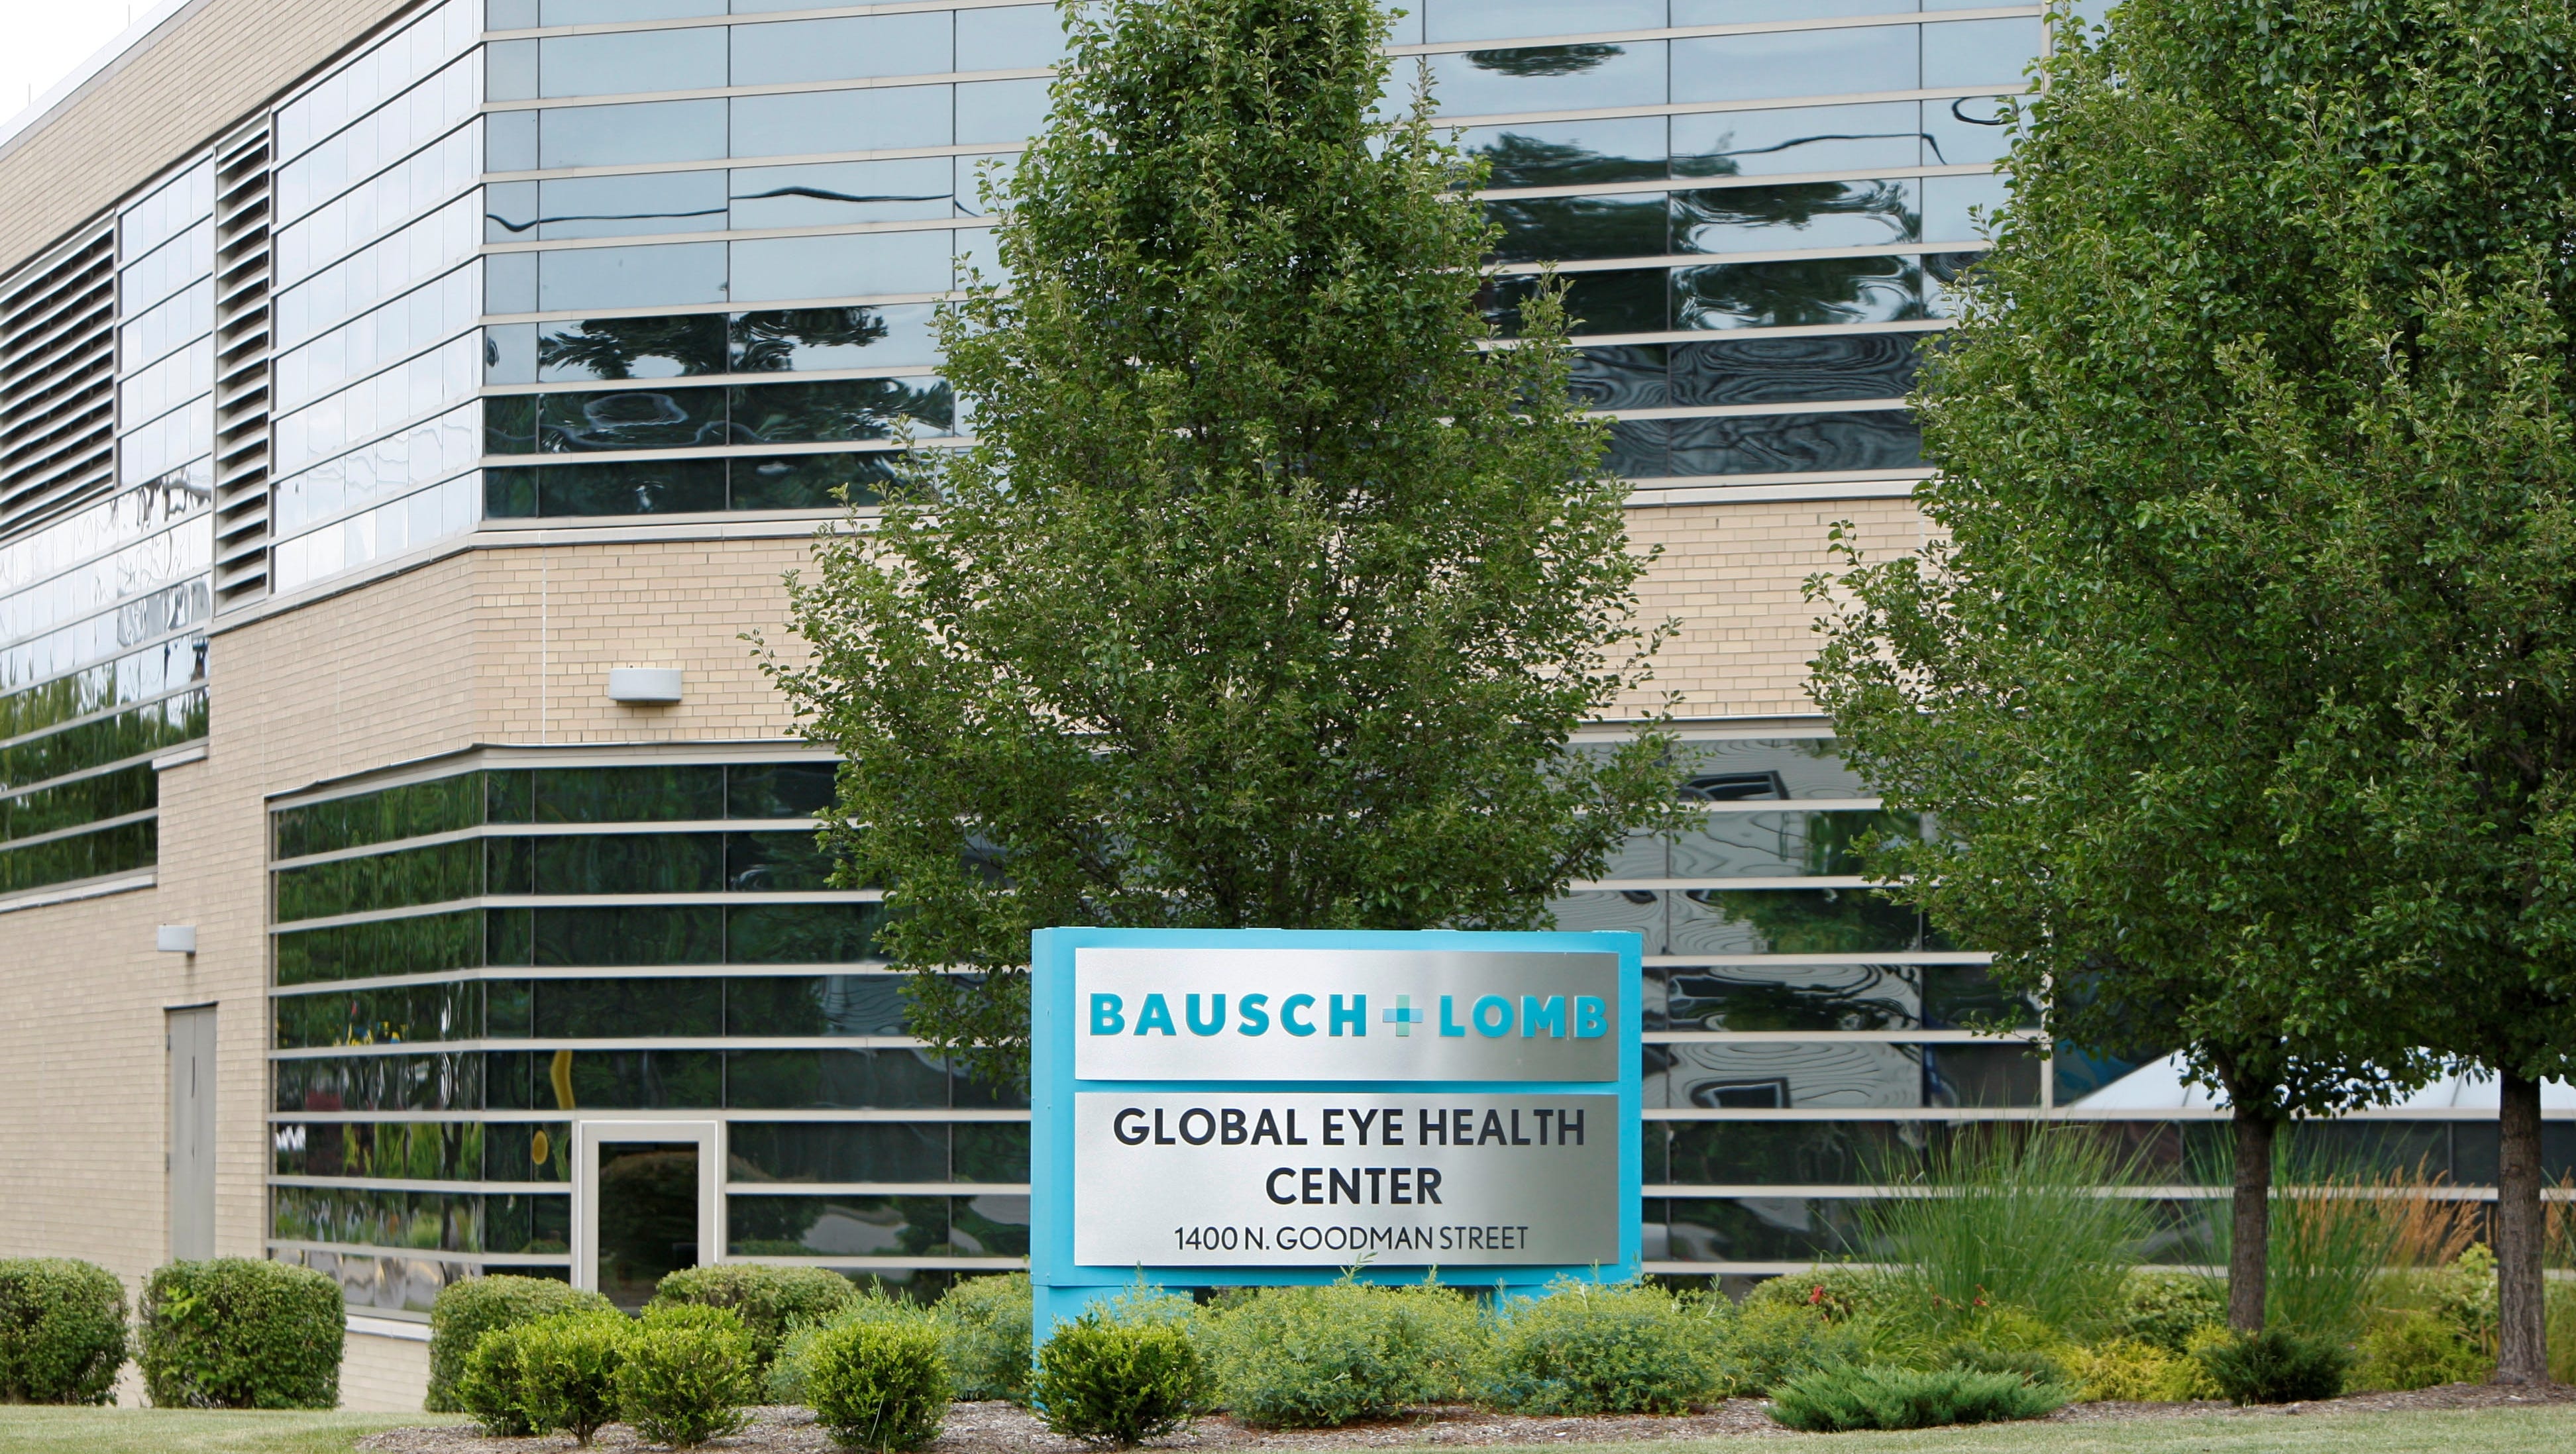 Bausch + Lomb moving headquarters to N.J., cutting jobs